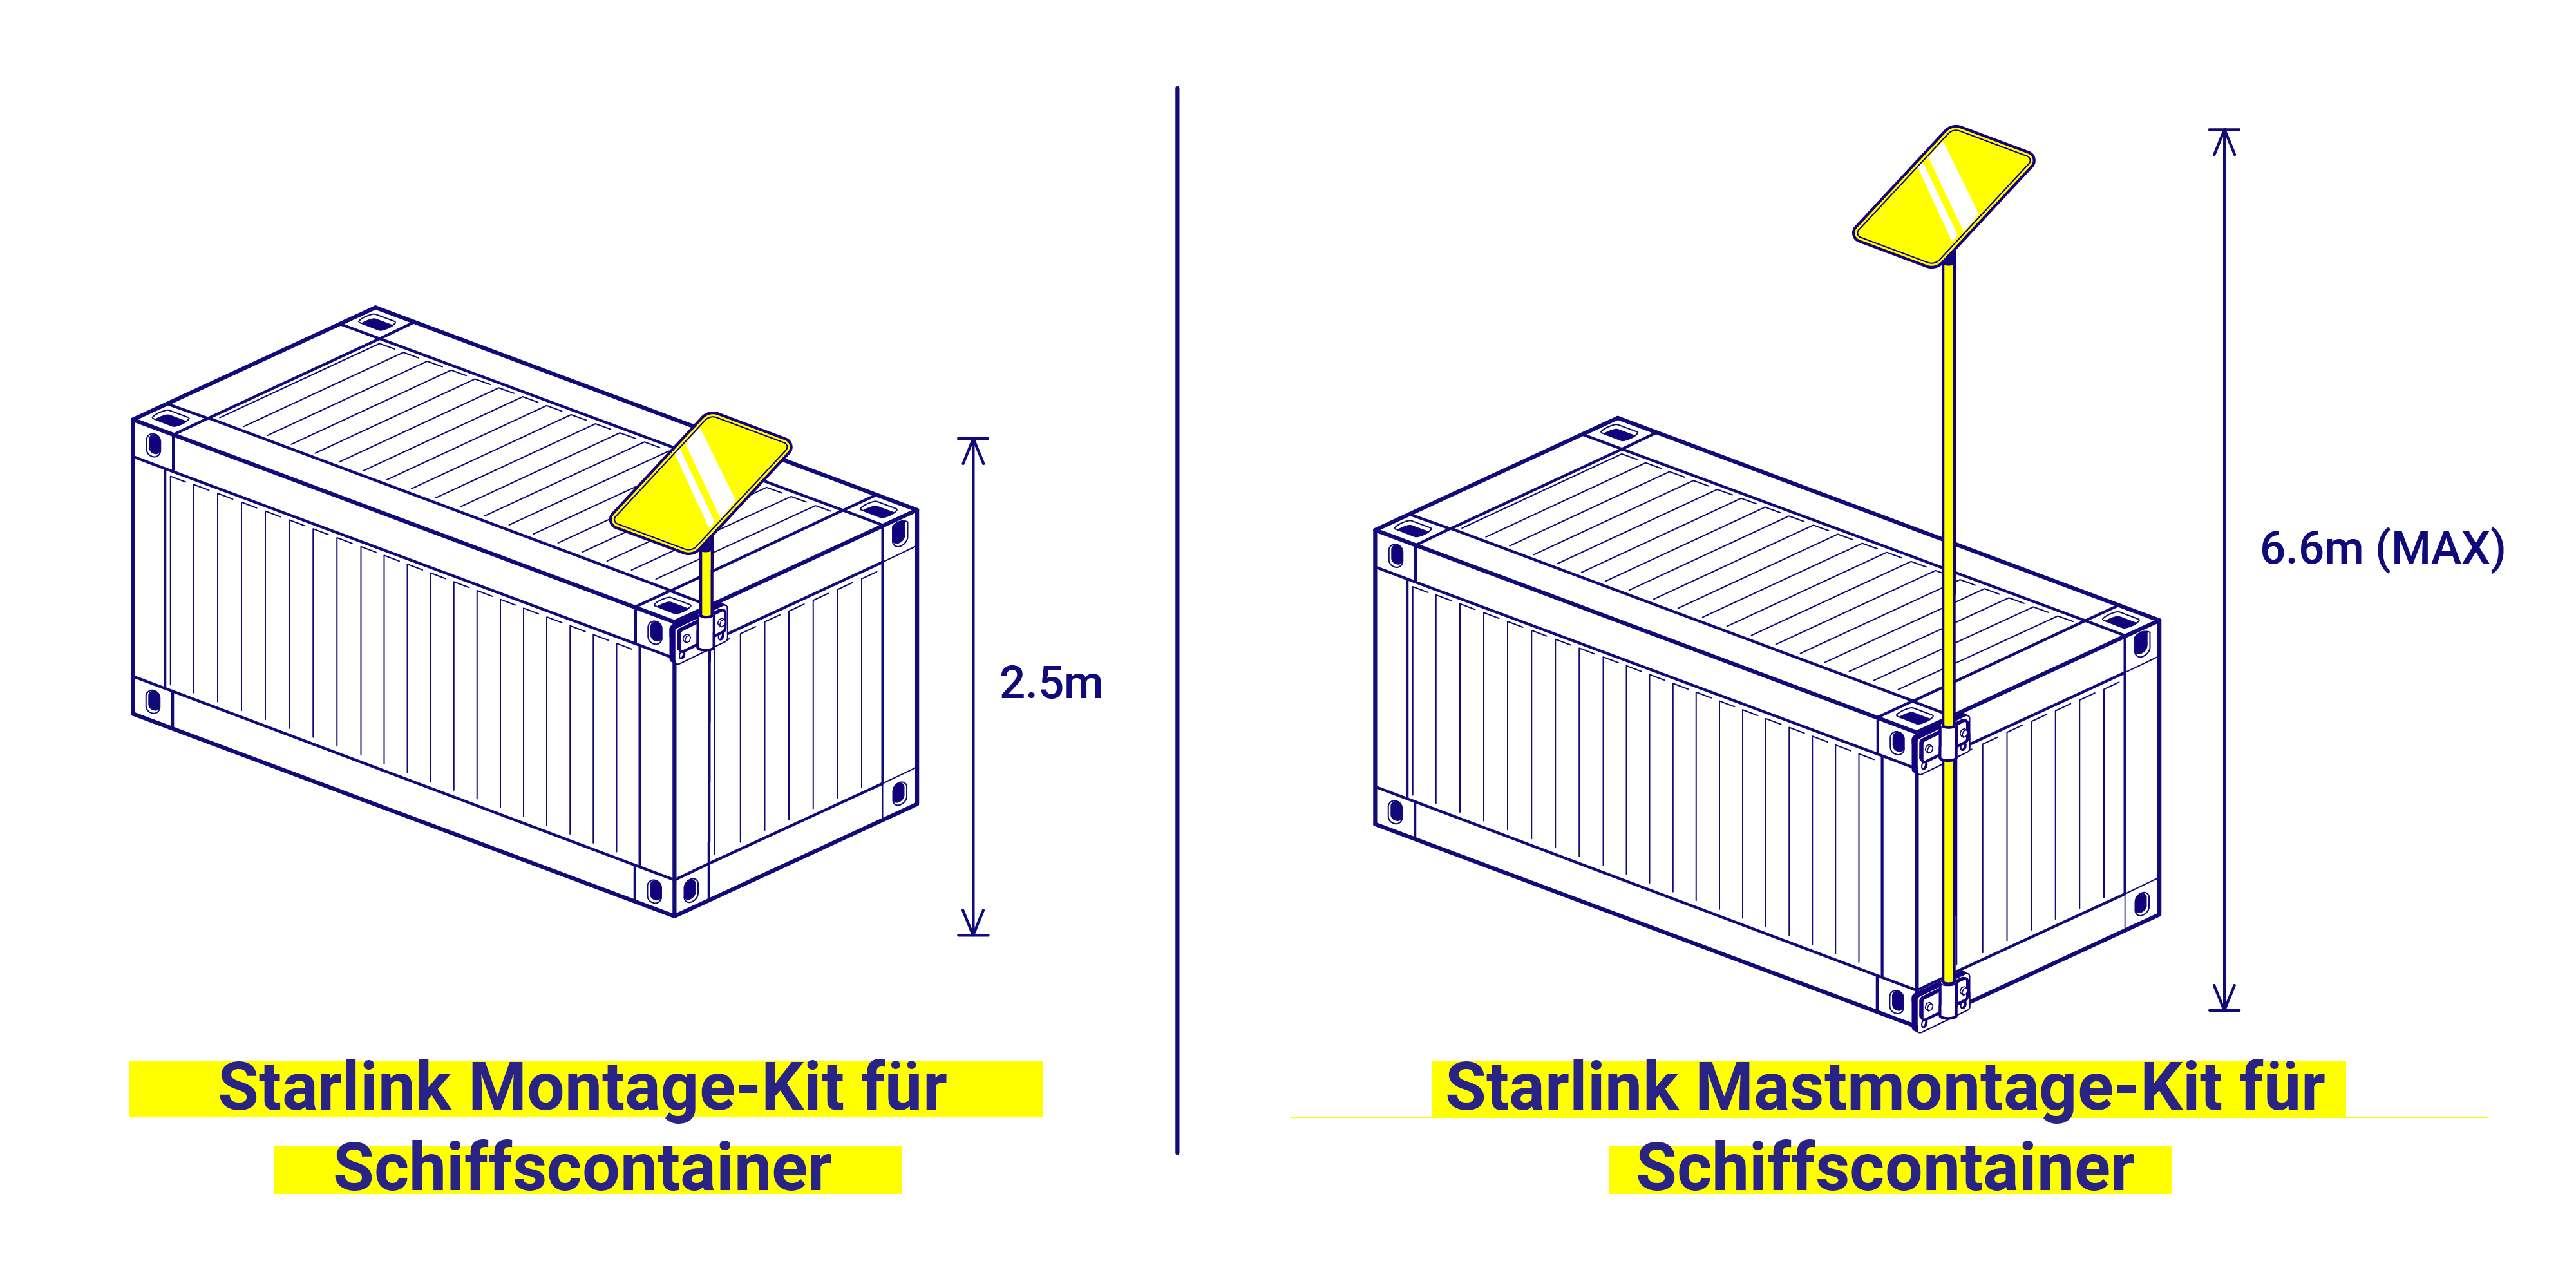 Starlink Kit for Shipping Containers comparison